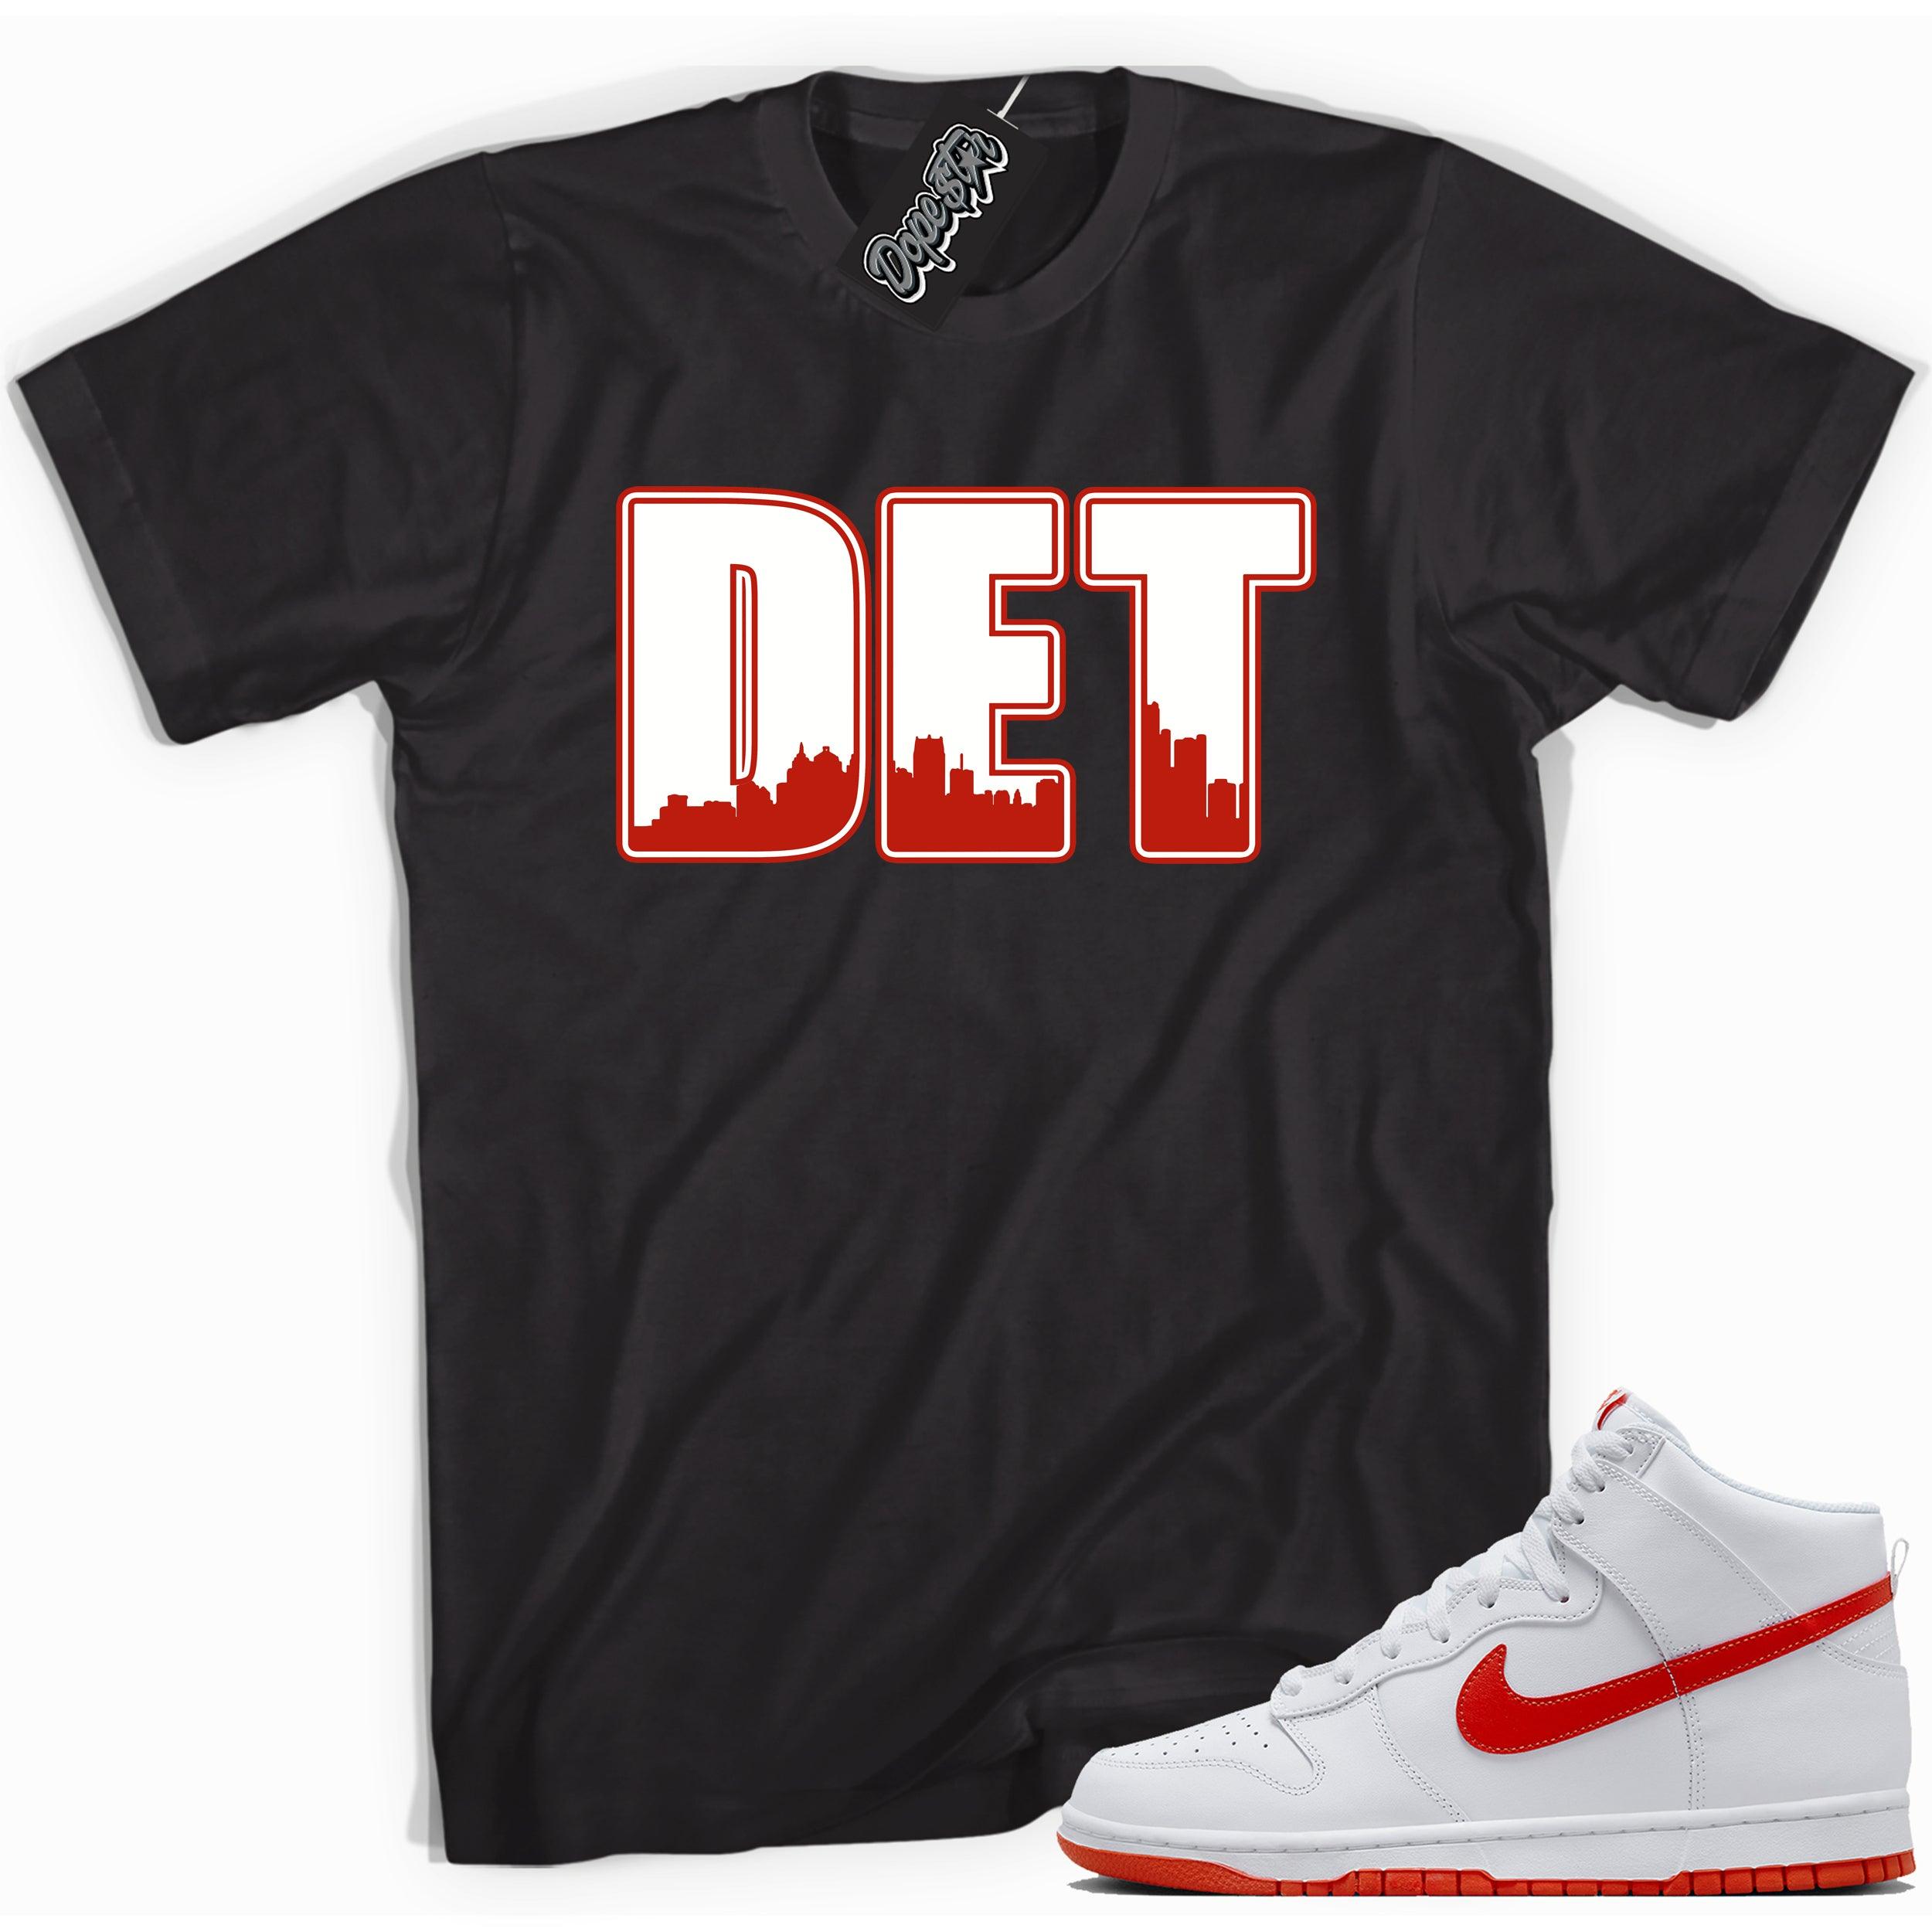 Cool black graphic tee with 'Detroit' print, that perfectly matches Nike Dunk High White Picante Red sneakers.